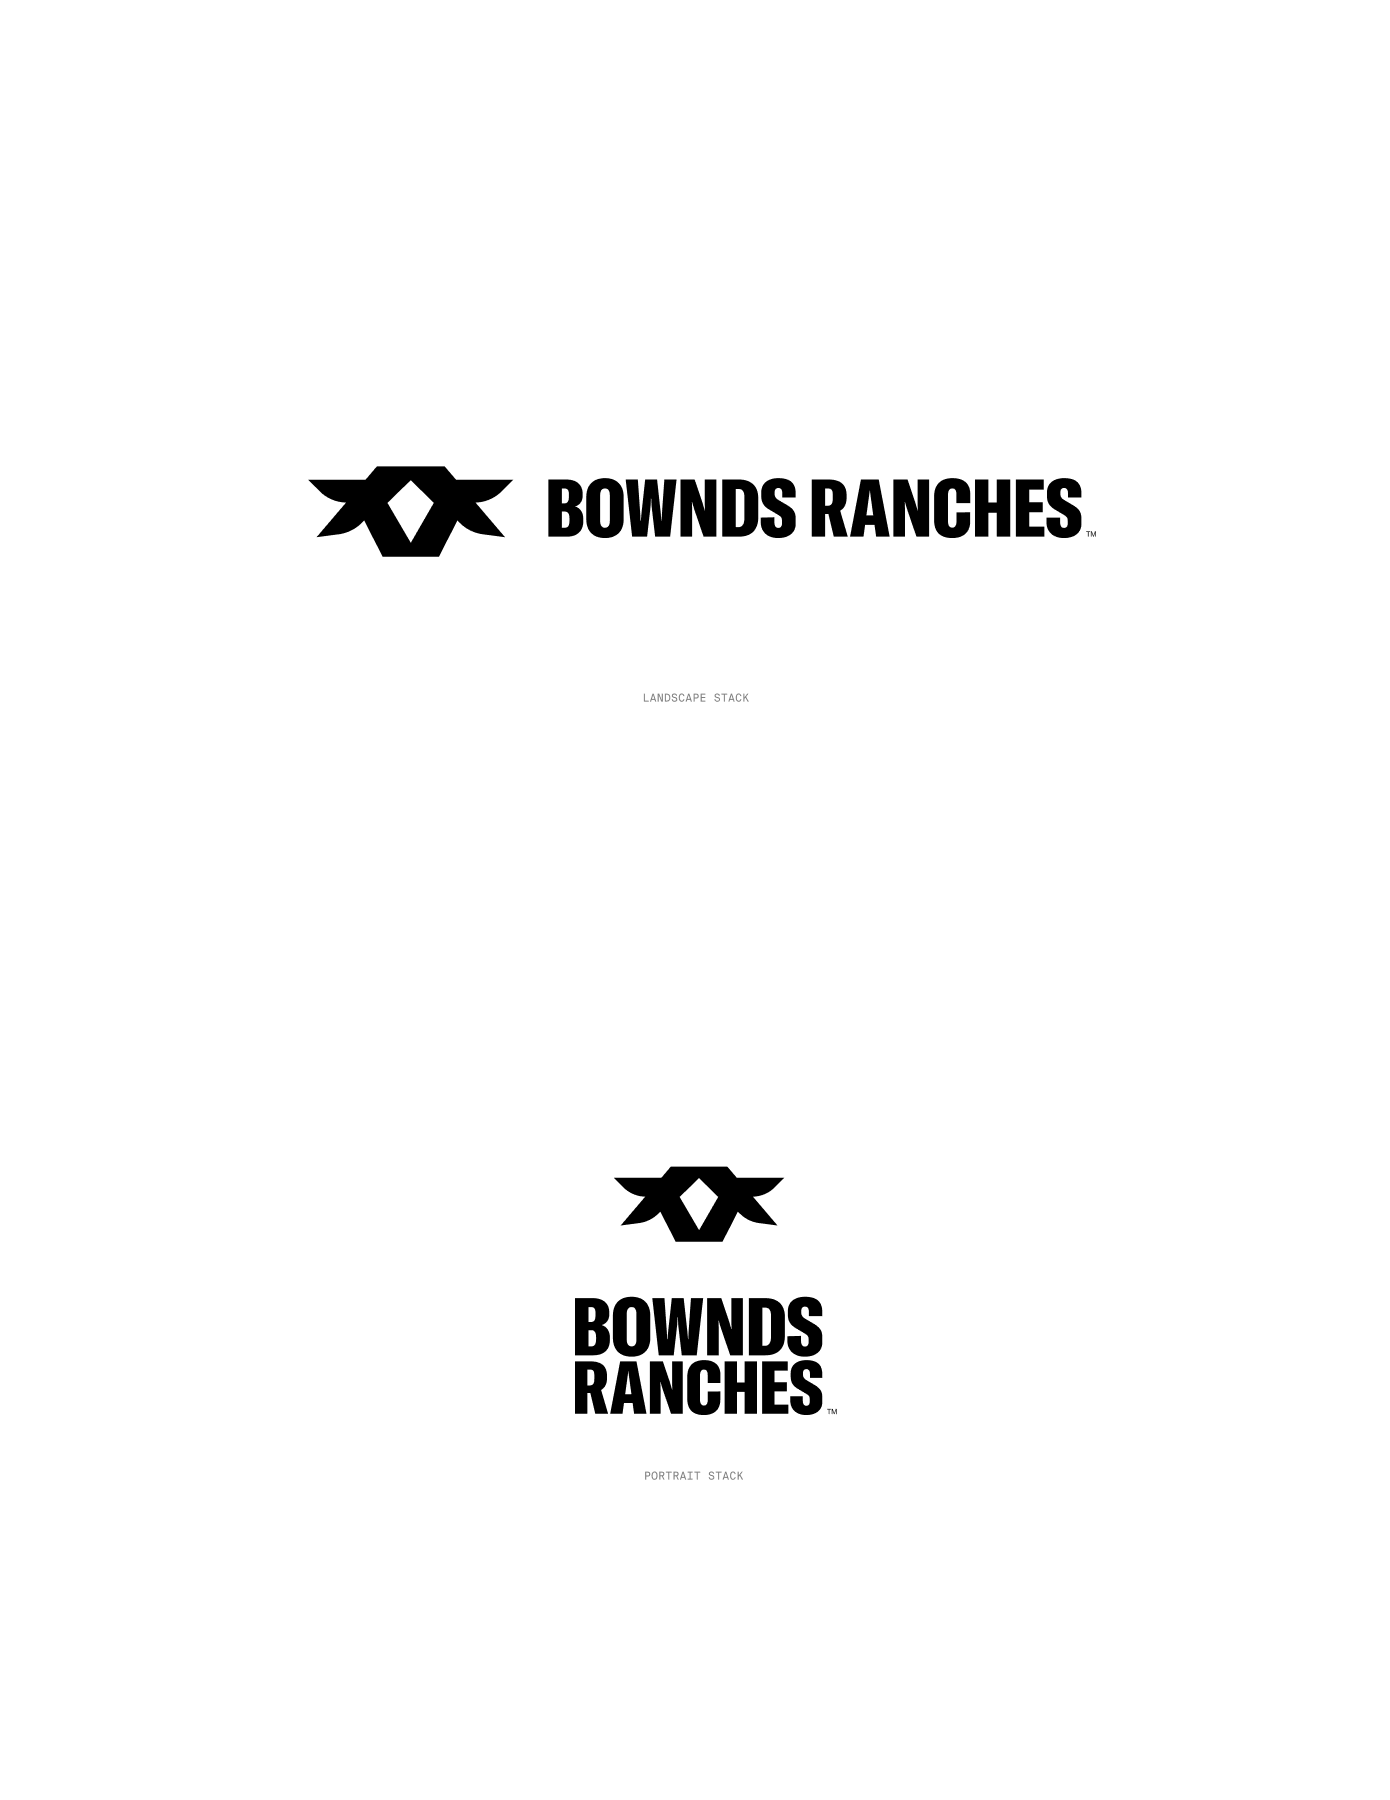 Bownds Ranches new logo portrait and landscape stack